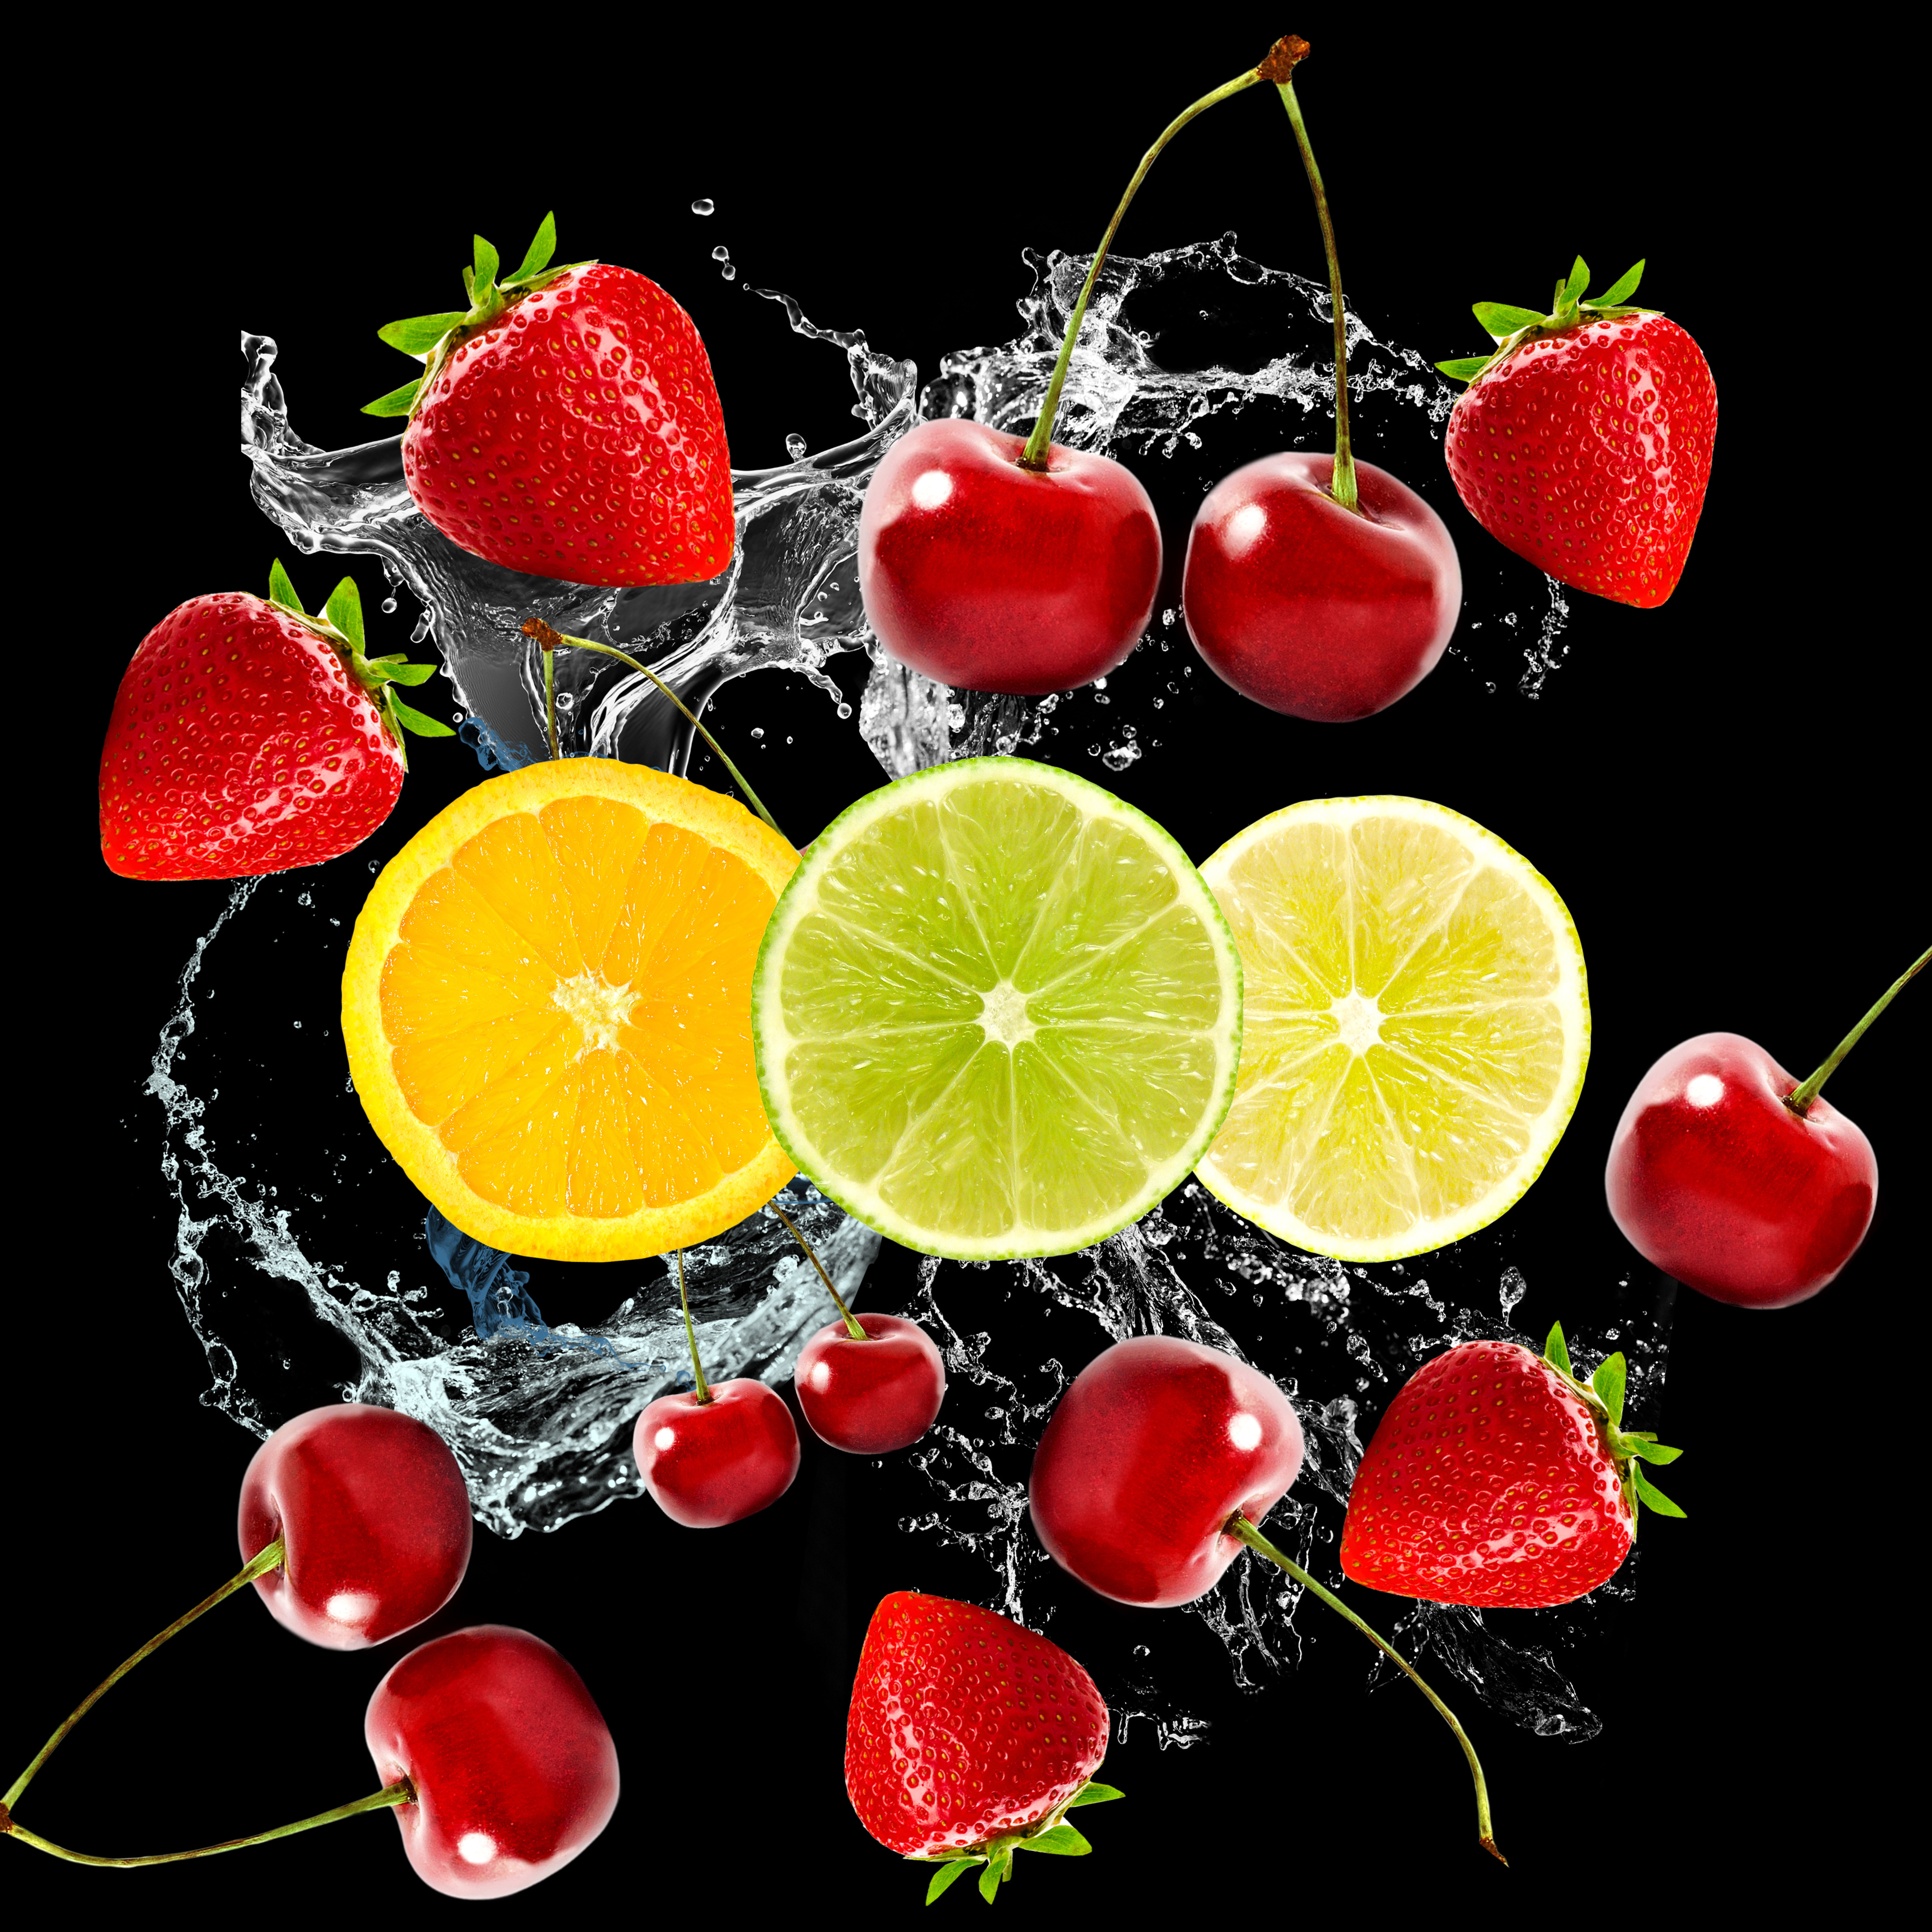 cherry and strawberry fruits, water, berries, citrus, black background